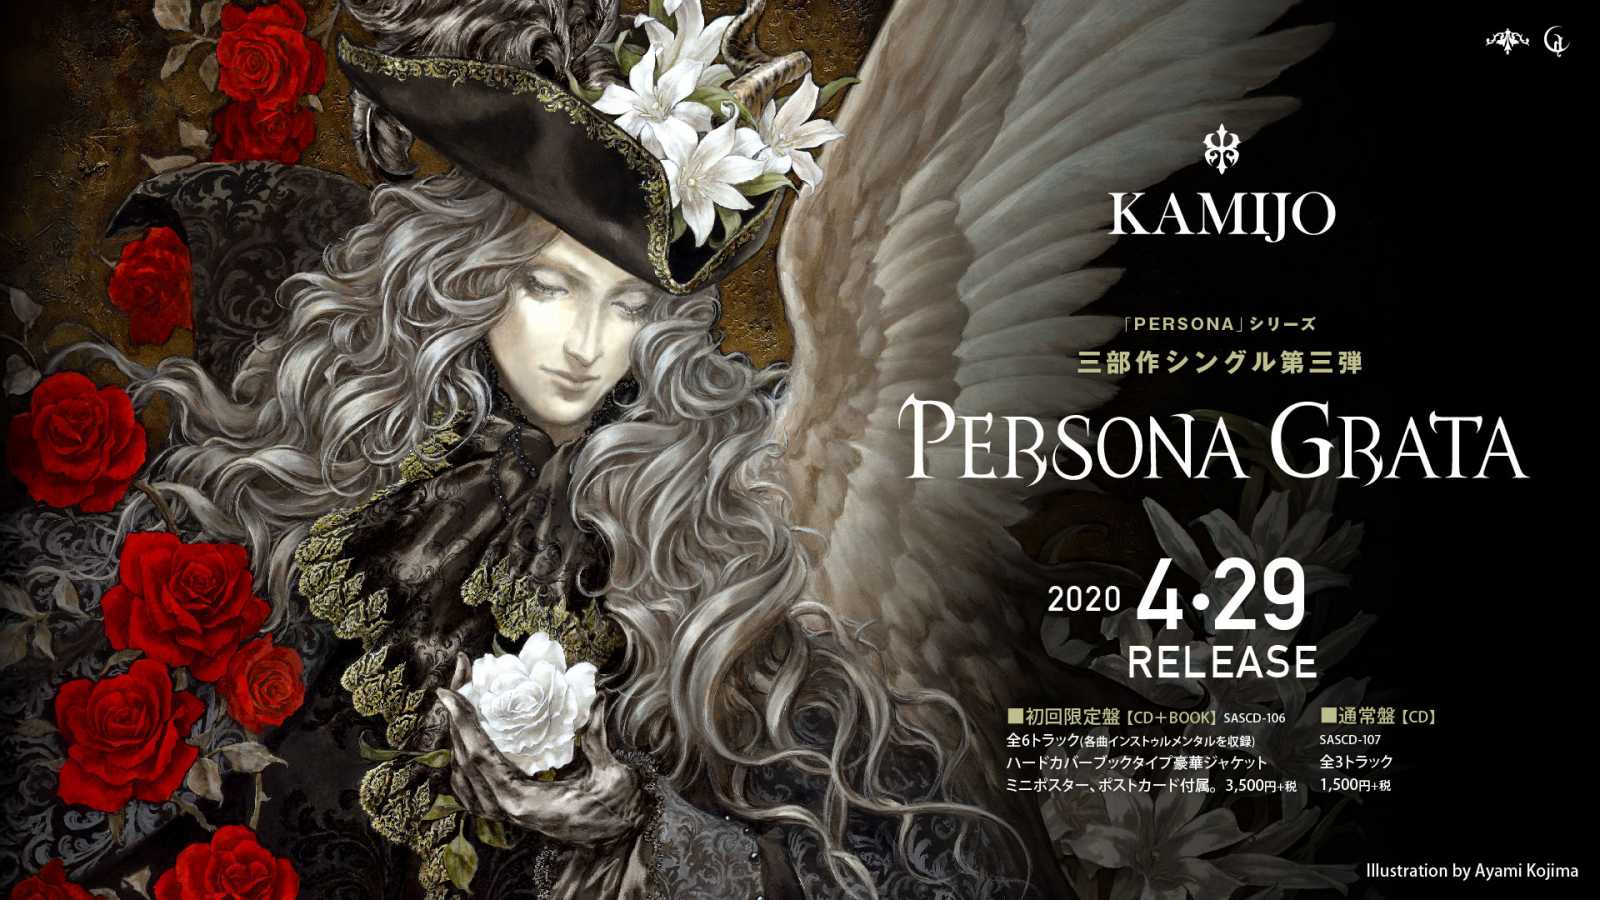 New Single from KAMIJO © CHATEAU AGENCY CO., Ltd. All rights reserved.